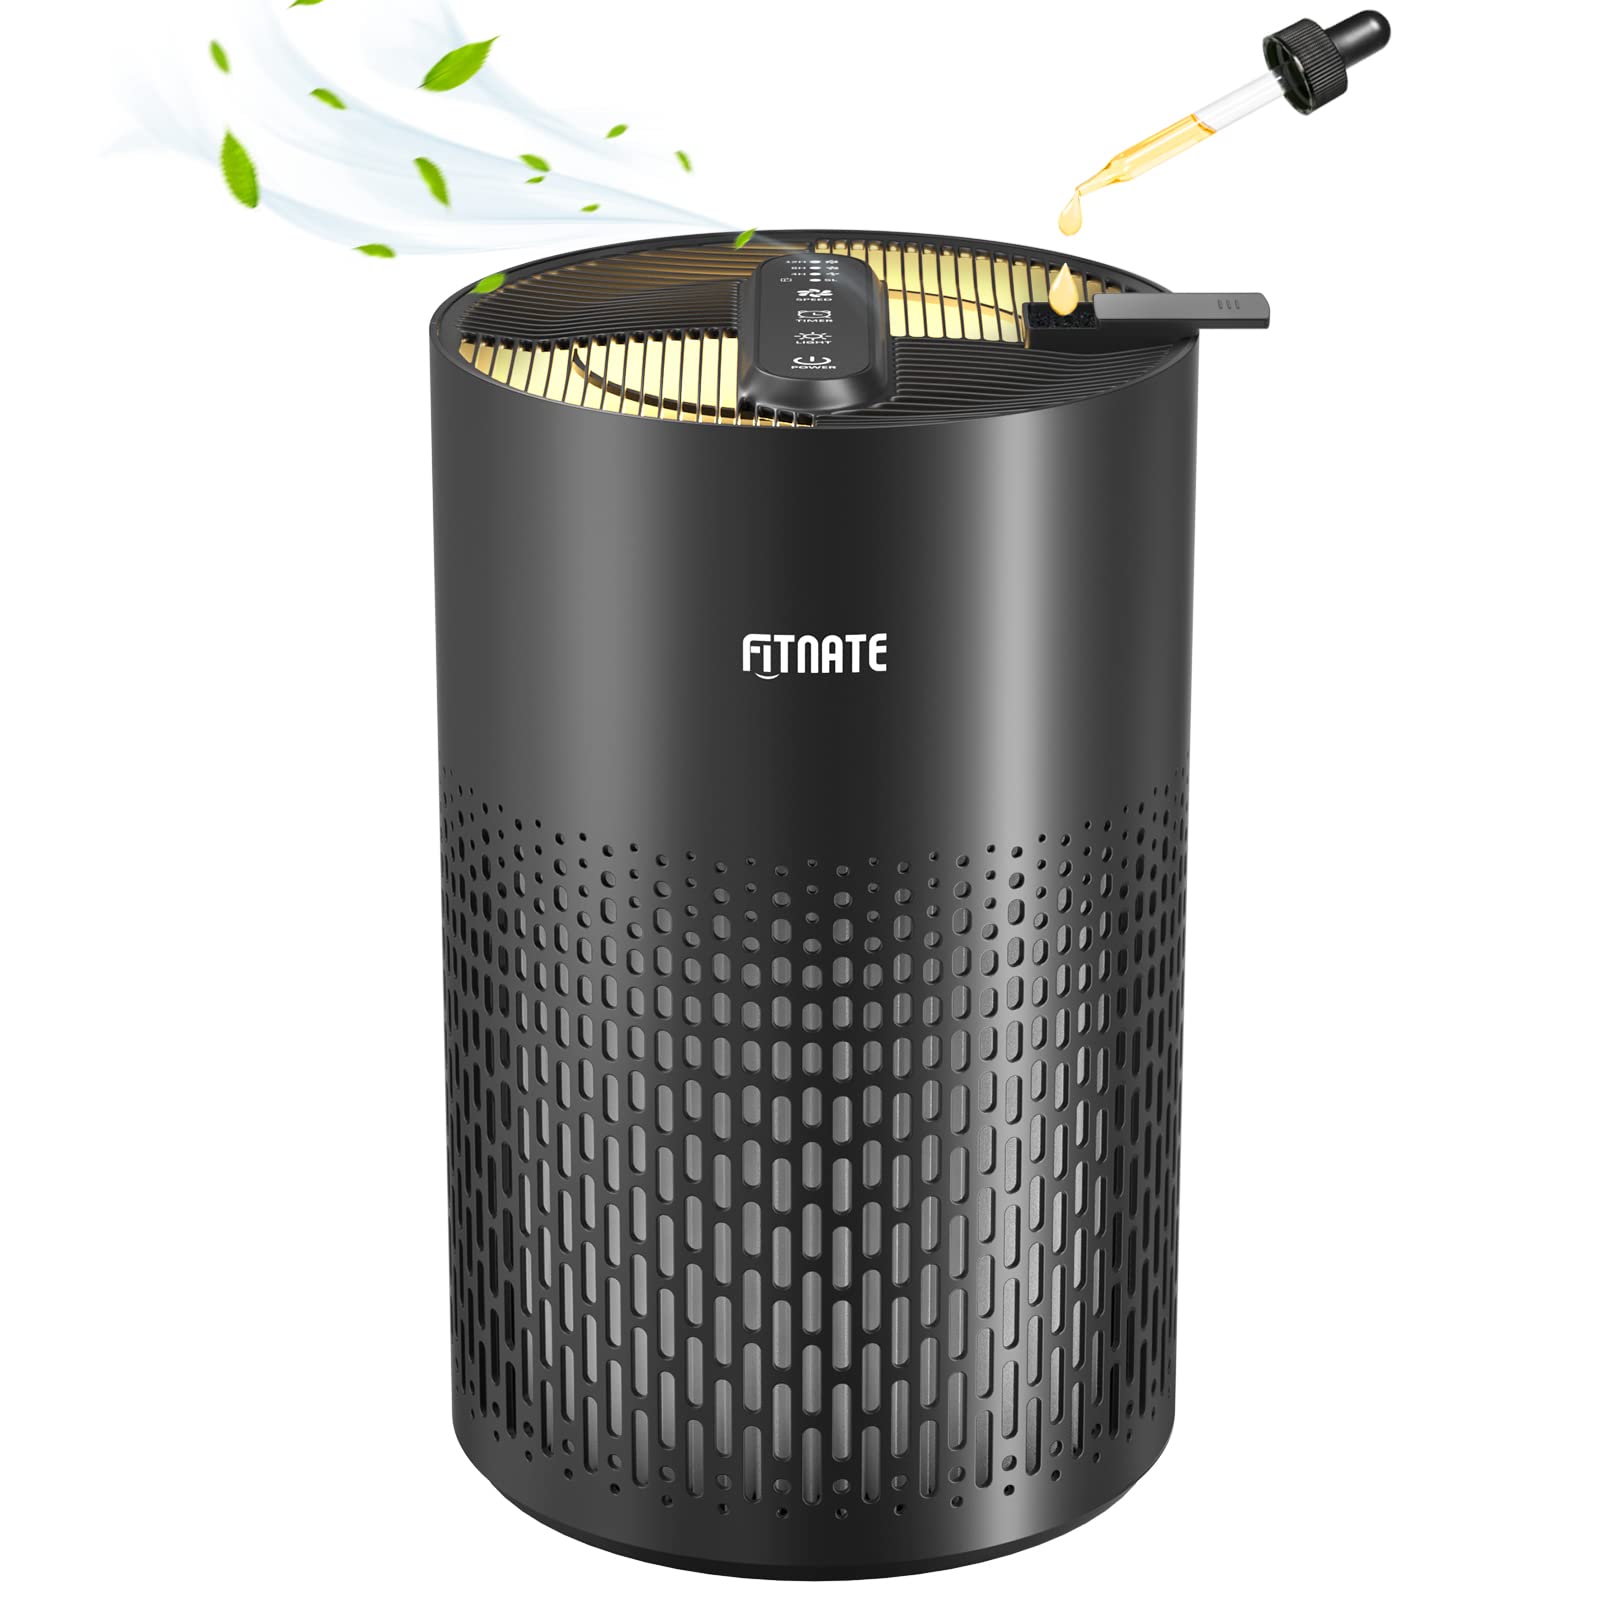 FITNATE Air Purifier with Essential Oil Diffuser